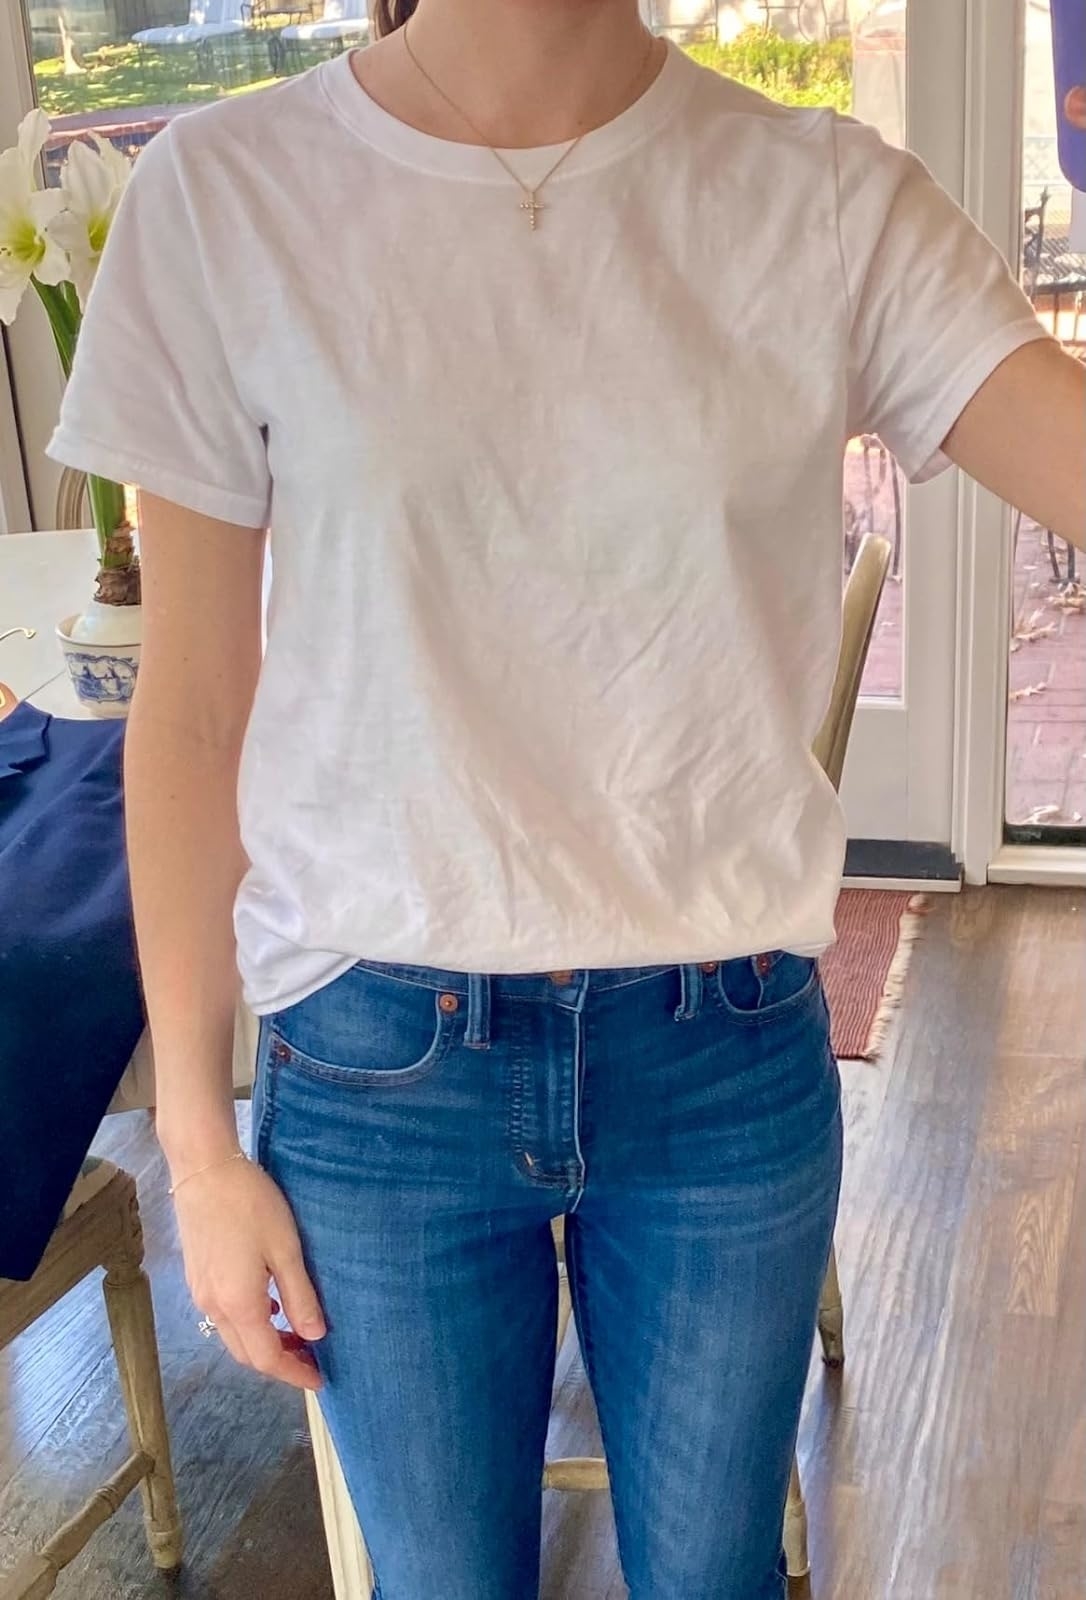 Person in a casual white t-shirt and blue jeans standing indoors